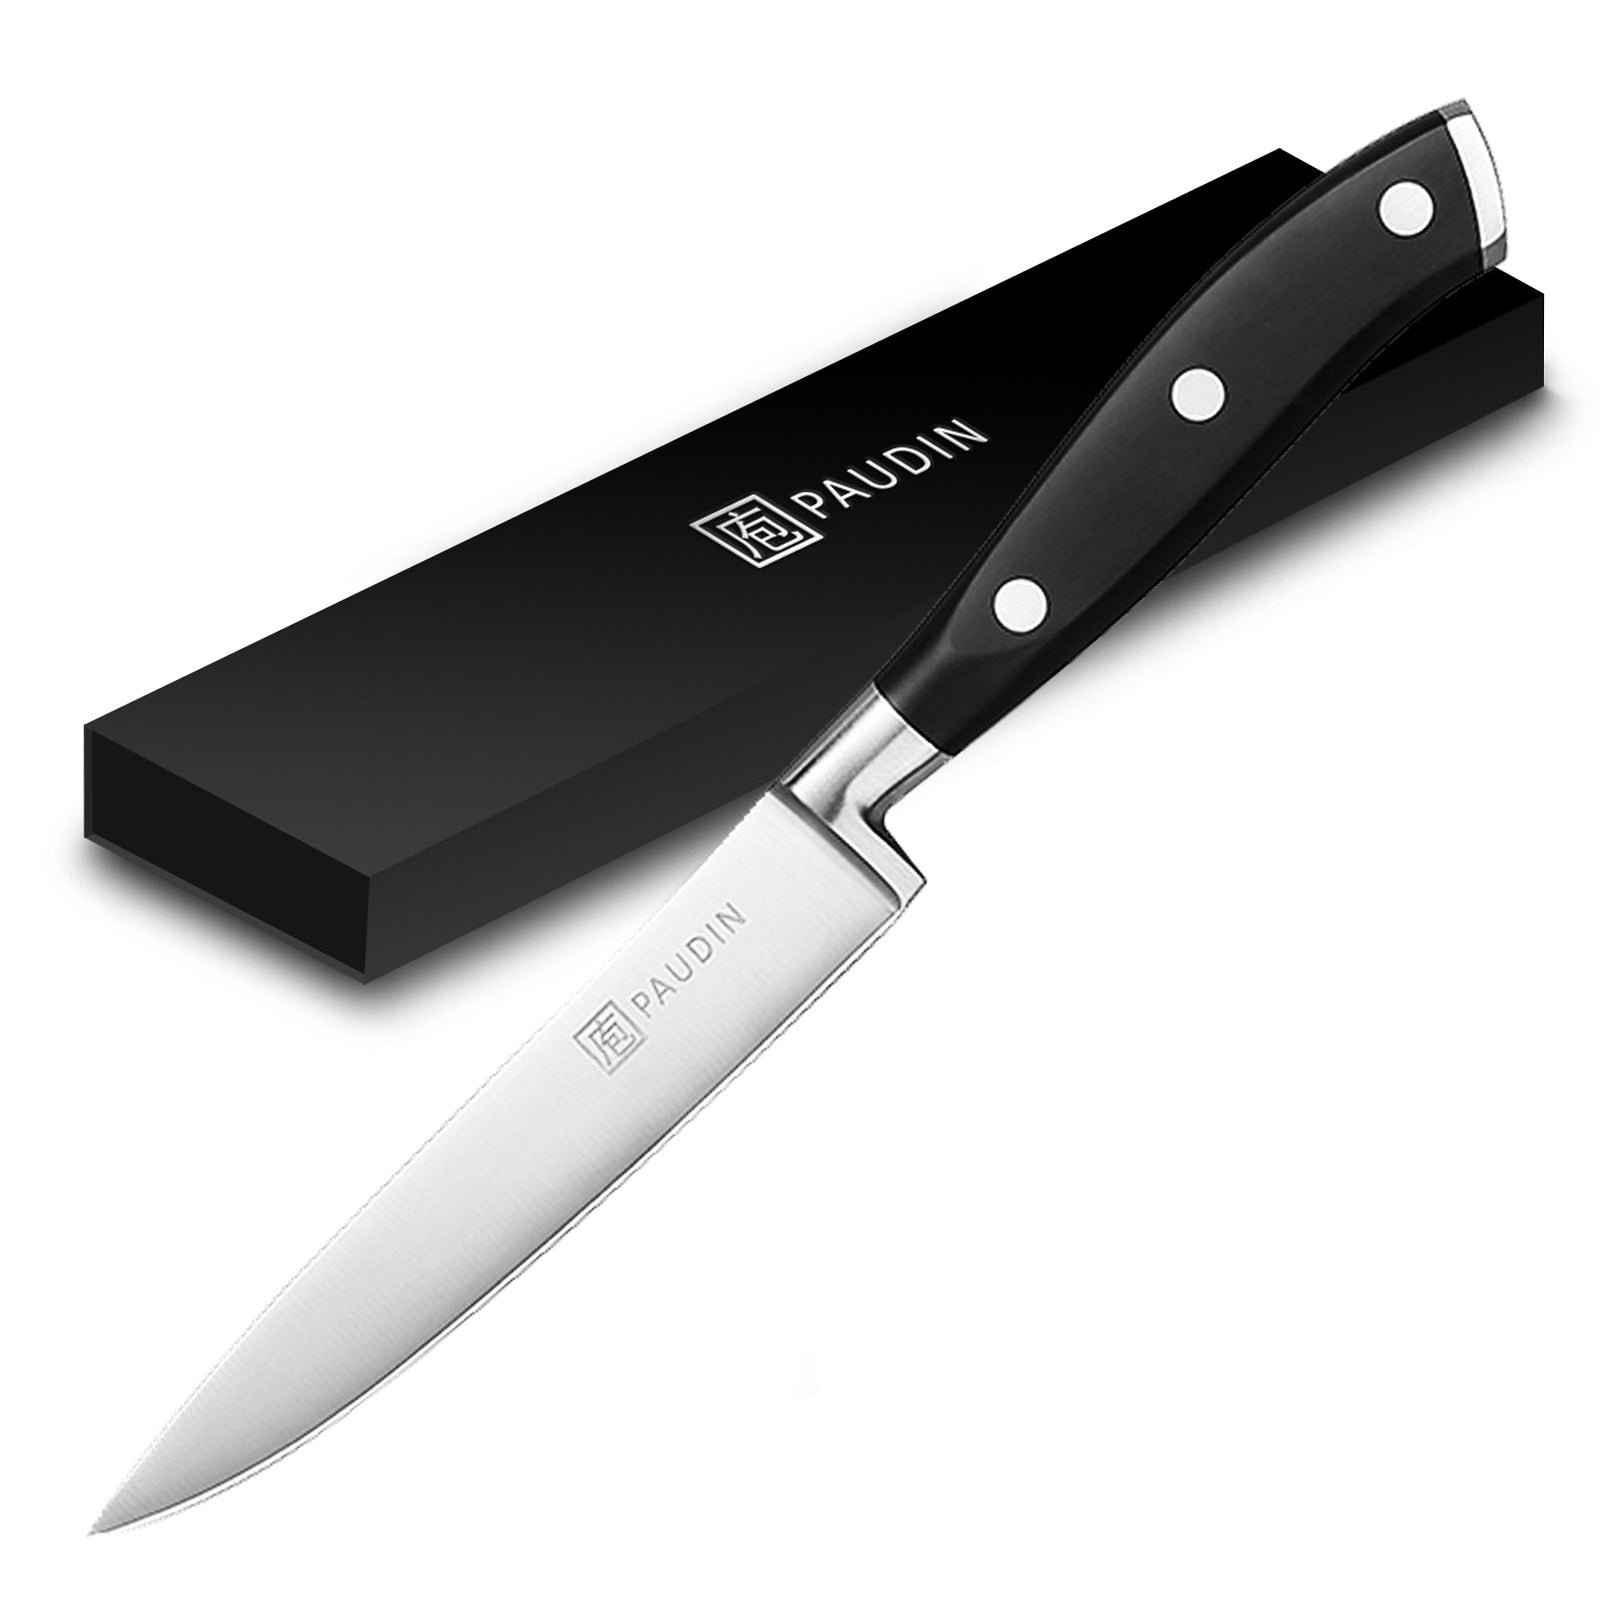 PAUDIN Utility Knife 5 inch Chef Knife German High Carbon Stainless Steel  Knife, Fruit and Vegetable Cutting Chopping Carving Knives, Ergonomic  Handle